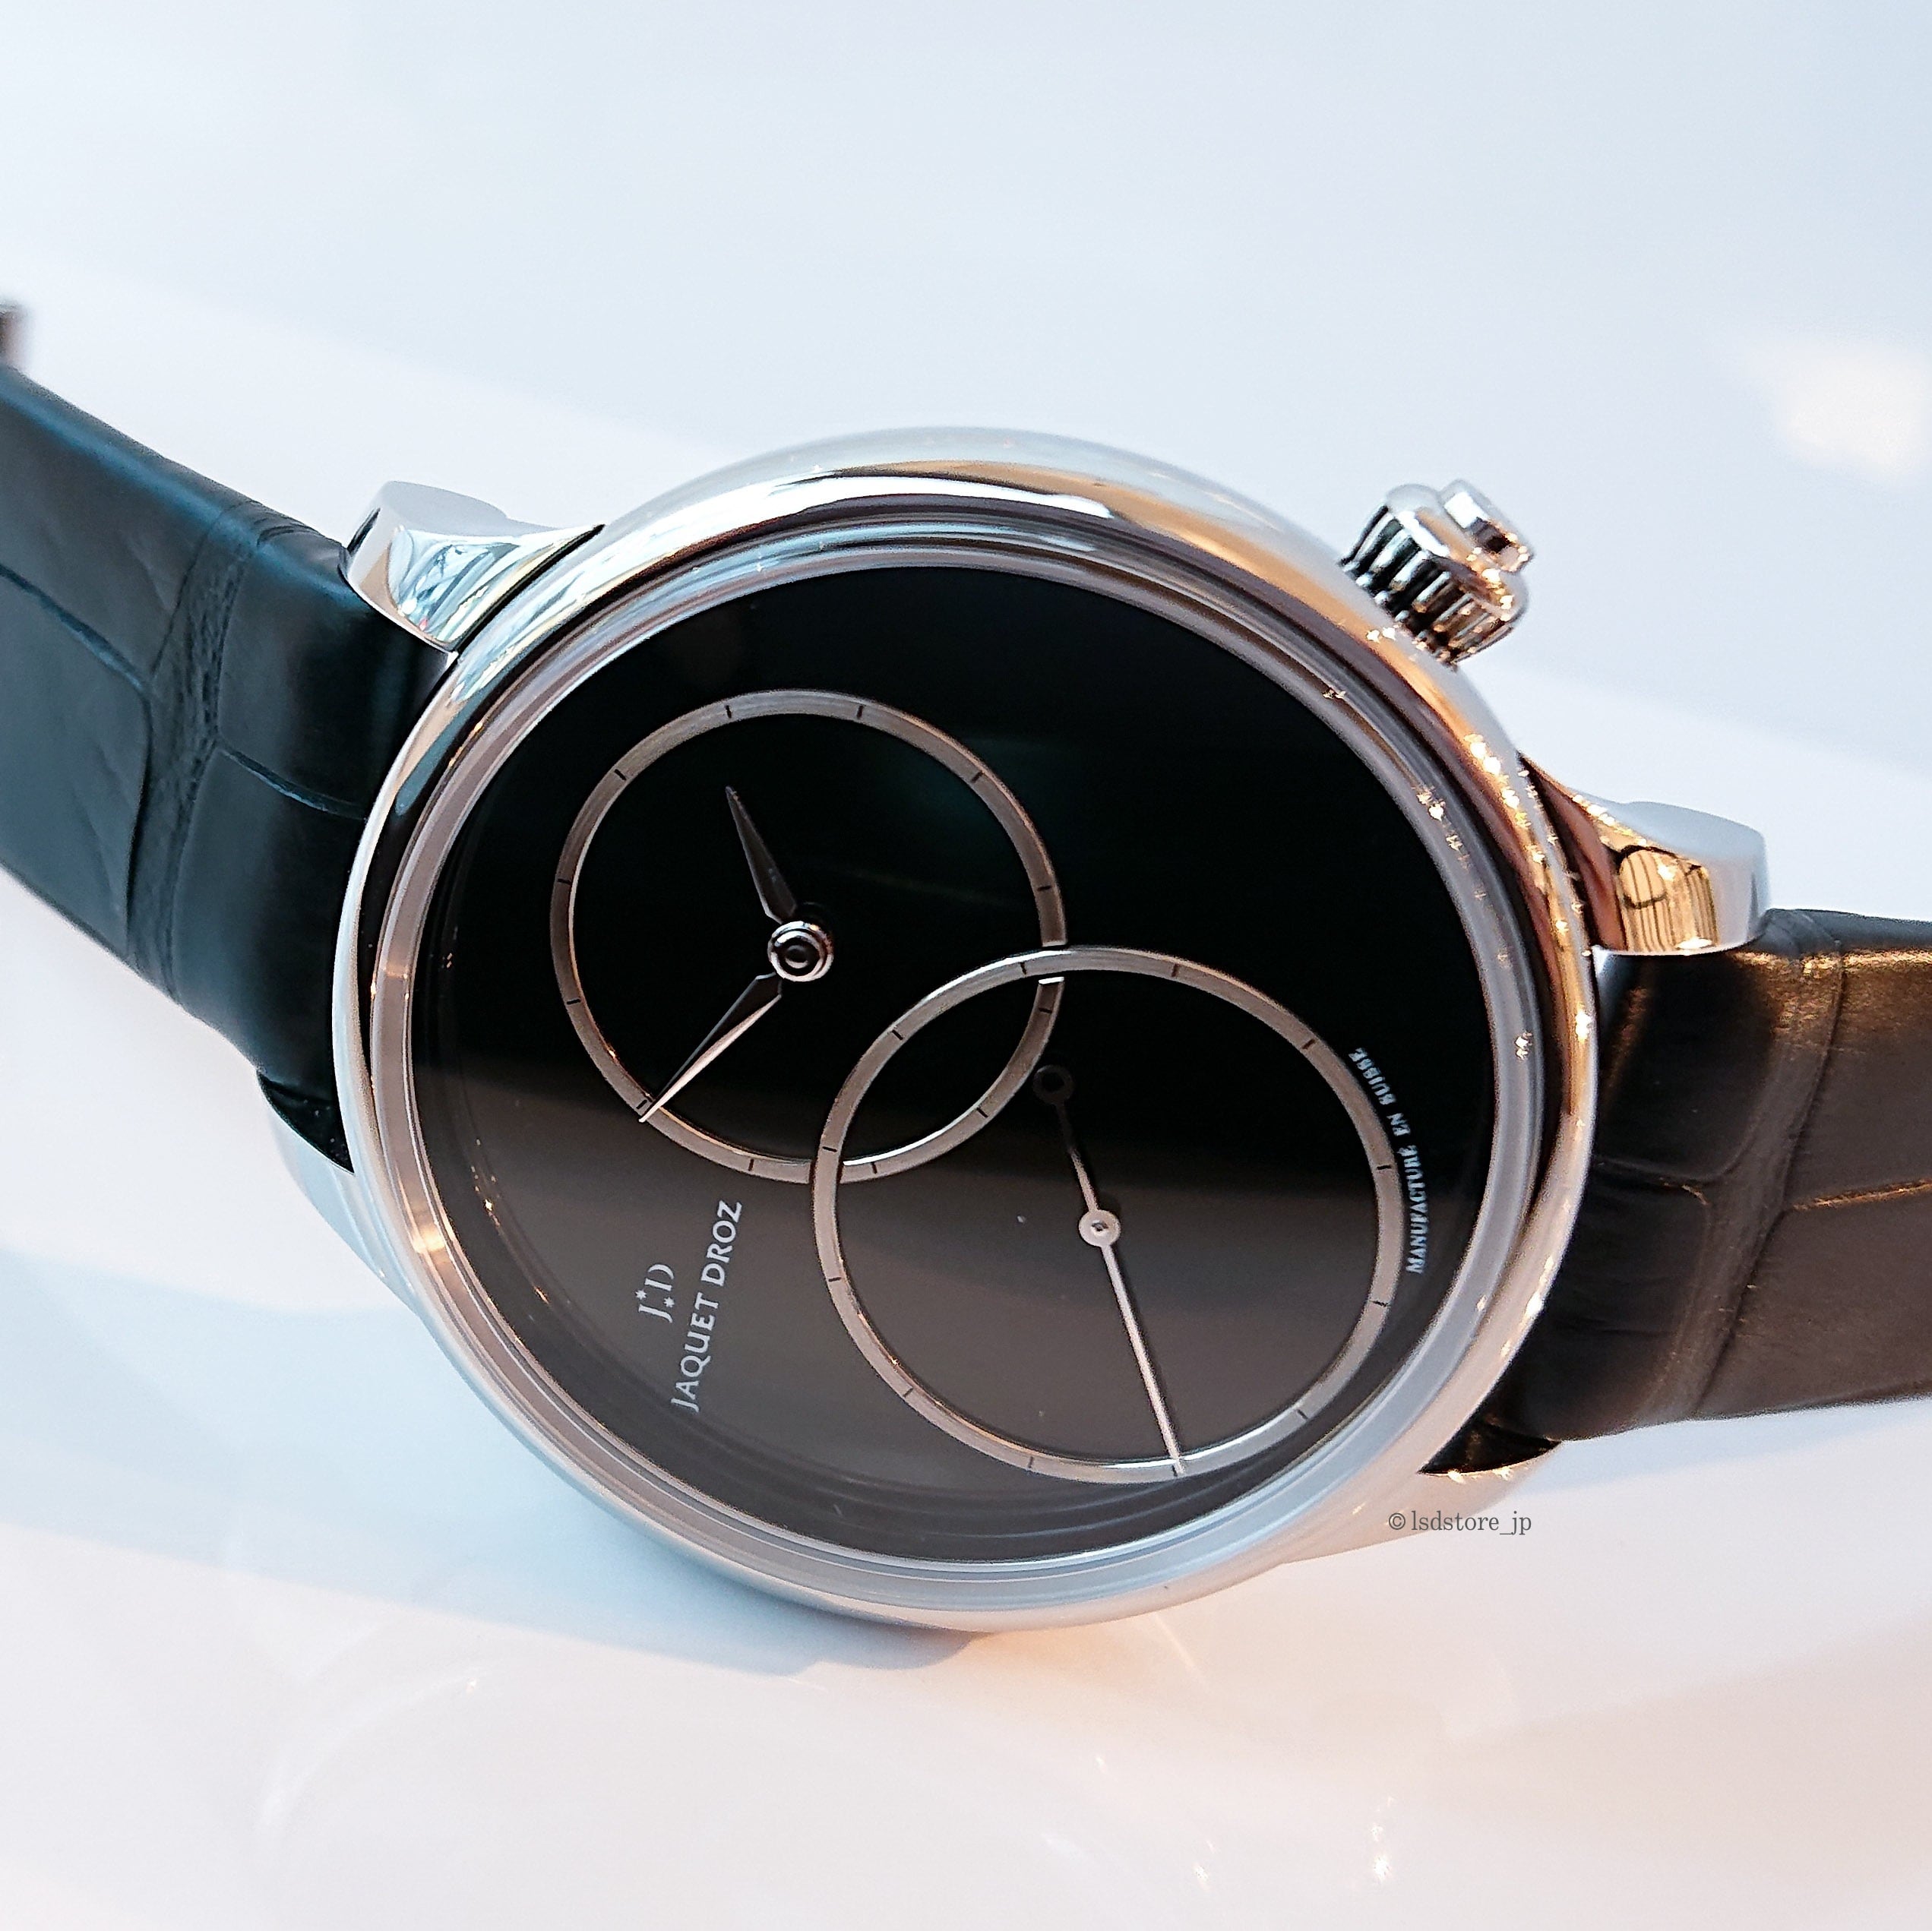 JAQUET DROZ ジャケ・ドロー】GRANDE SECONDE OFF-CENTERED 39mm ONYX